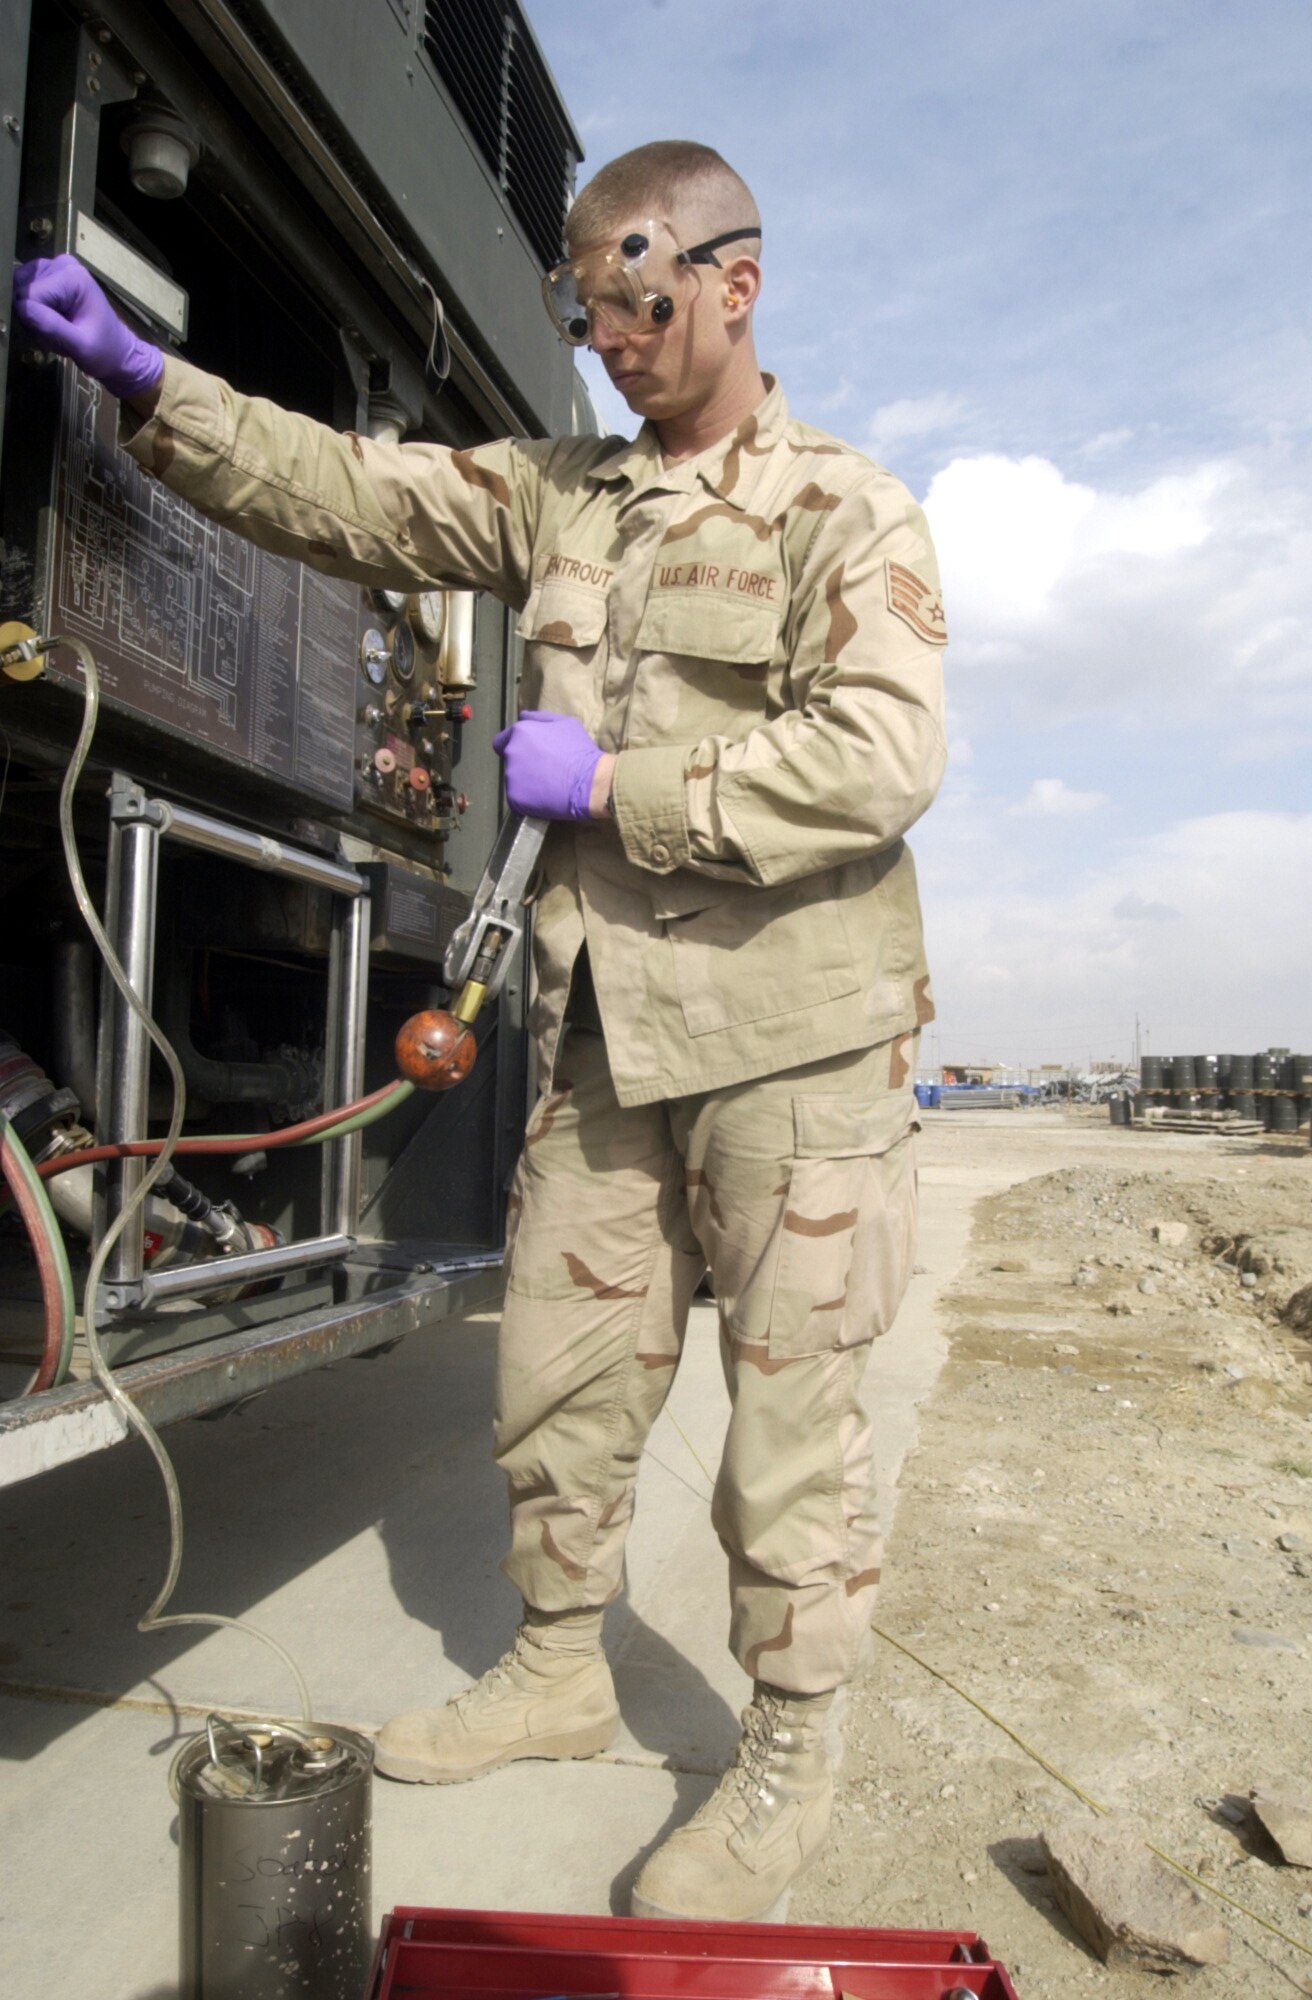 BAGRAM AIR BASE, Afghanistan -- Staff Sgt. Robert Armentrout takes a fuel sample to check for water particles.  Armentrout is a fuels specialist assigned to the 455th Expeditionary Operations Group.  (U.S. Air Force photo by Tech. Sgt. Brian Davidson)
